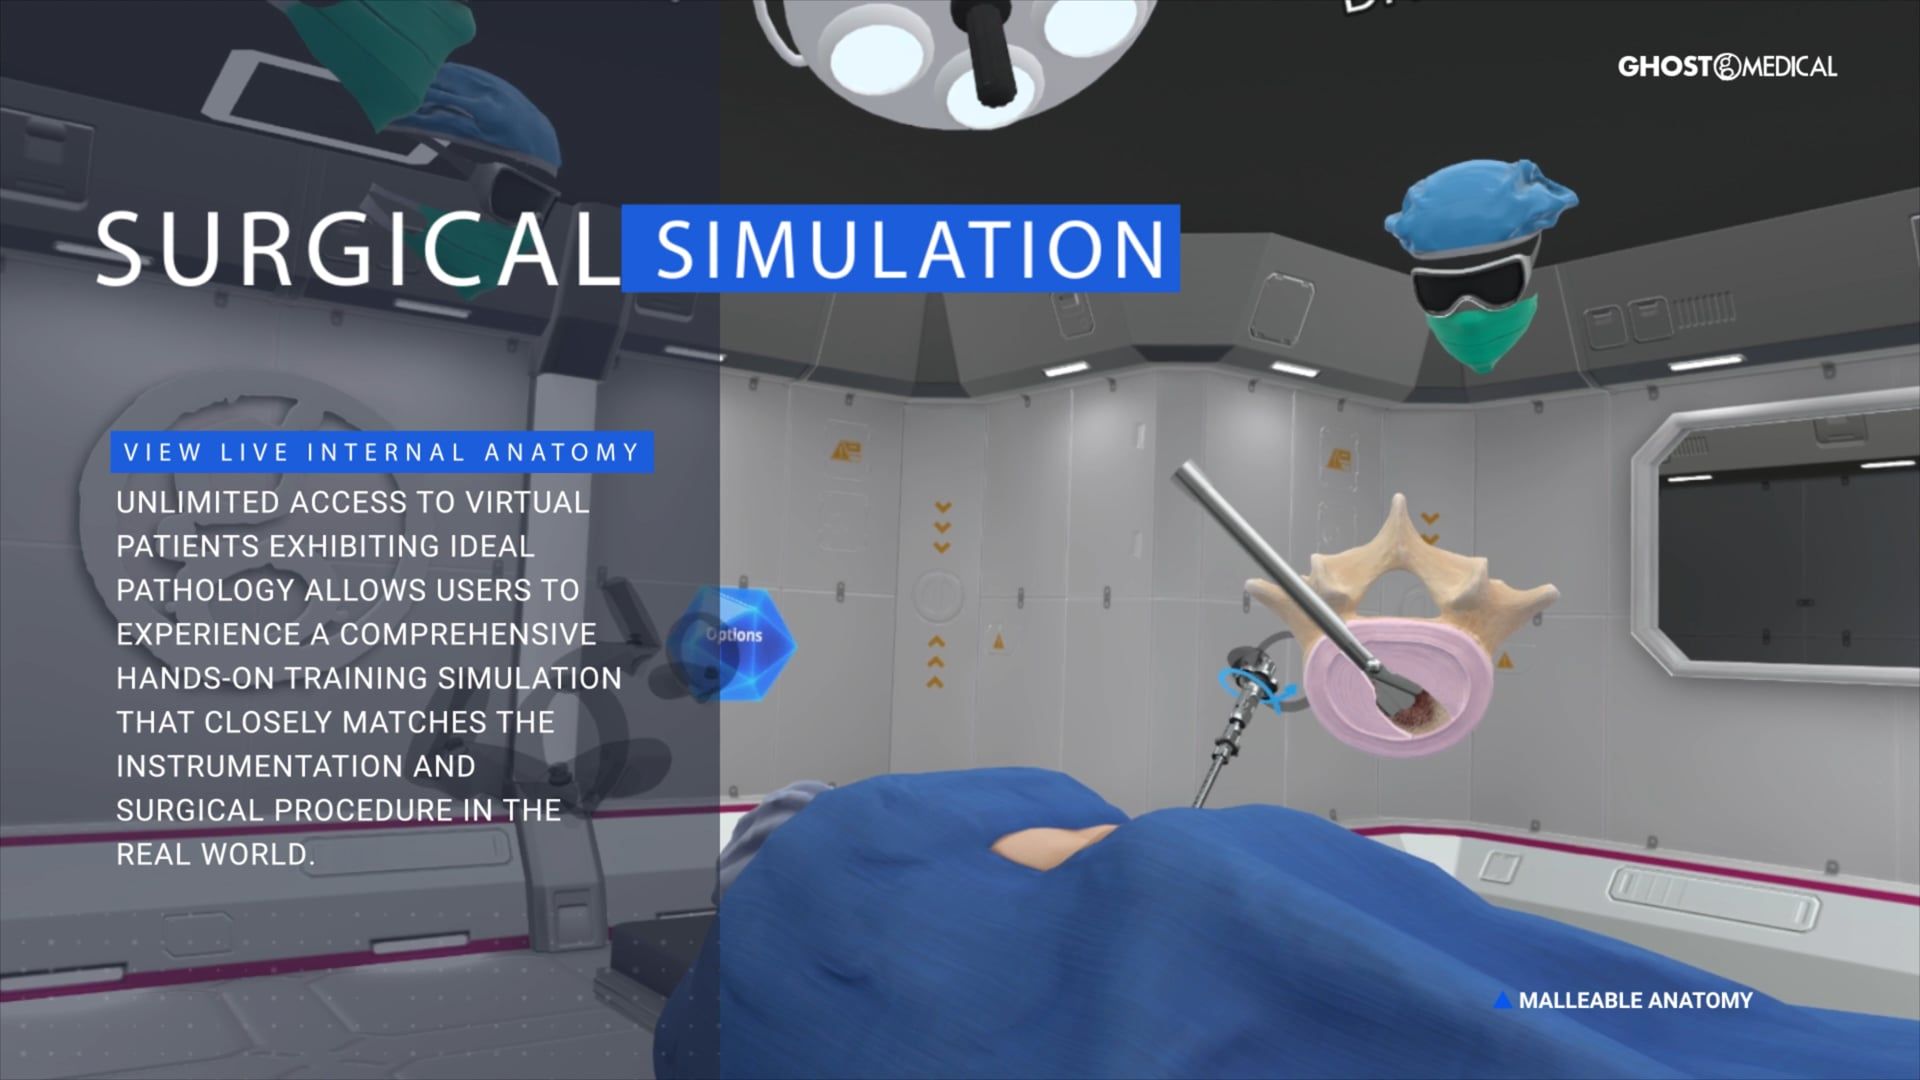 Surgical VR - Benefits and Capabilities 4k